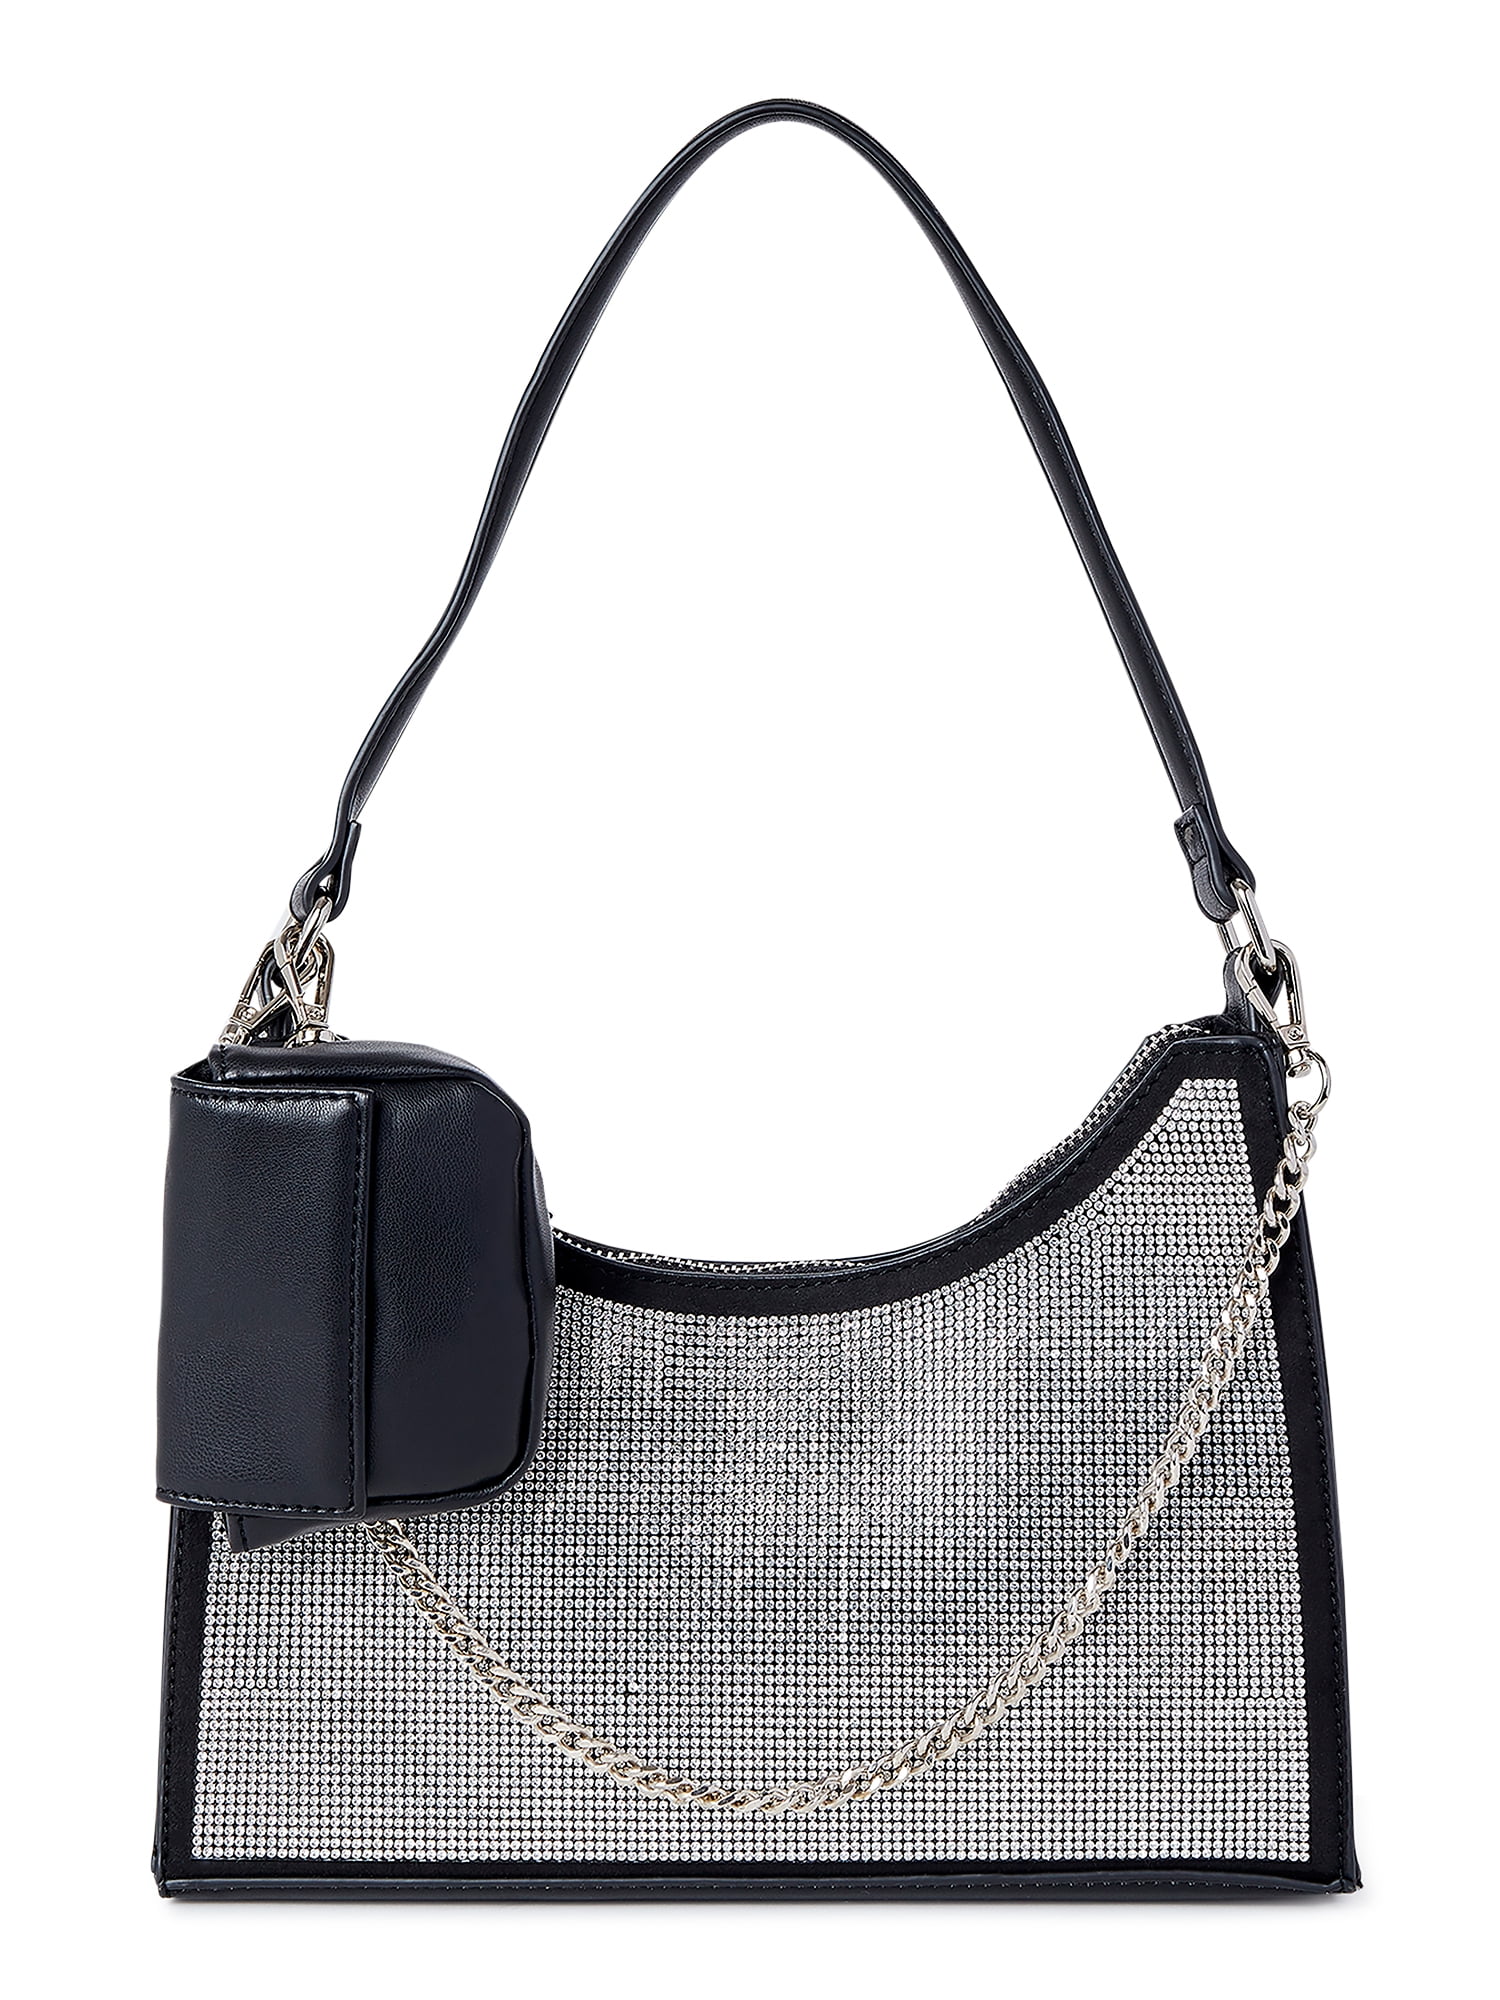 Madden NYC Women's Rhinestone Shoulder Bag with Pouch